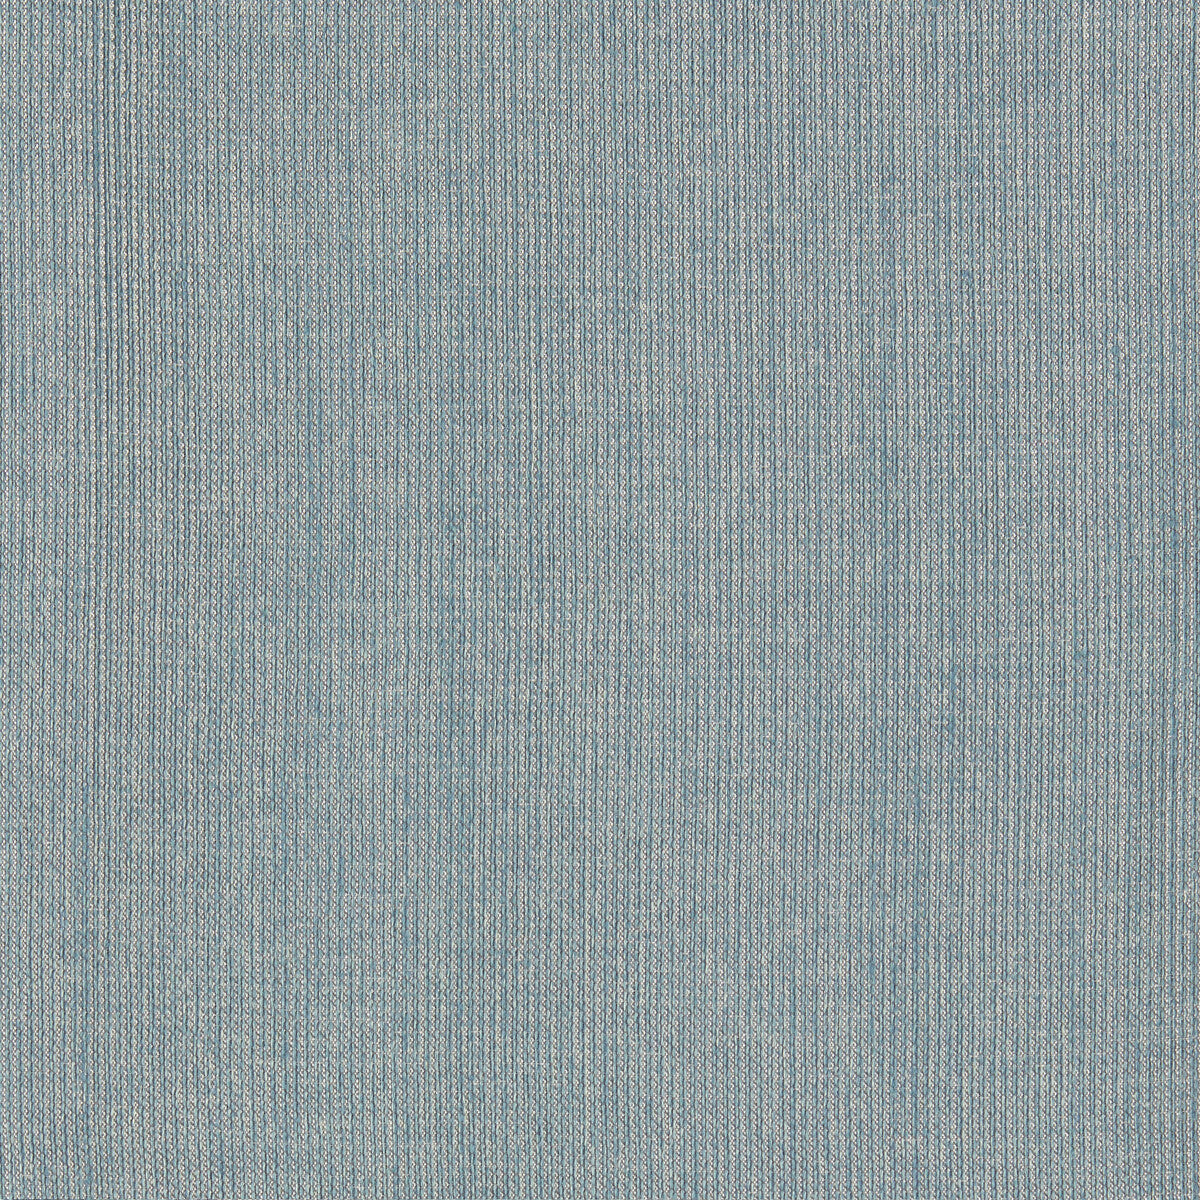 Pura fabric in eau de nil color - pattern F1408/02.CAC.0 - by Clarke And Clarke in the Clarke &amp; Clarke Natura collection